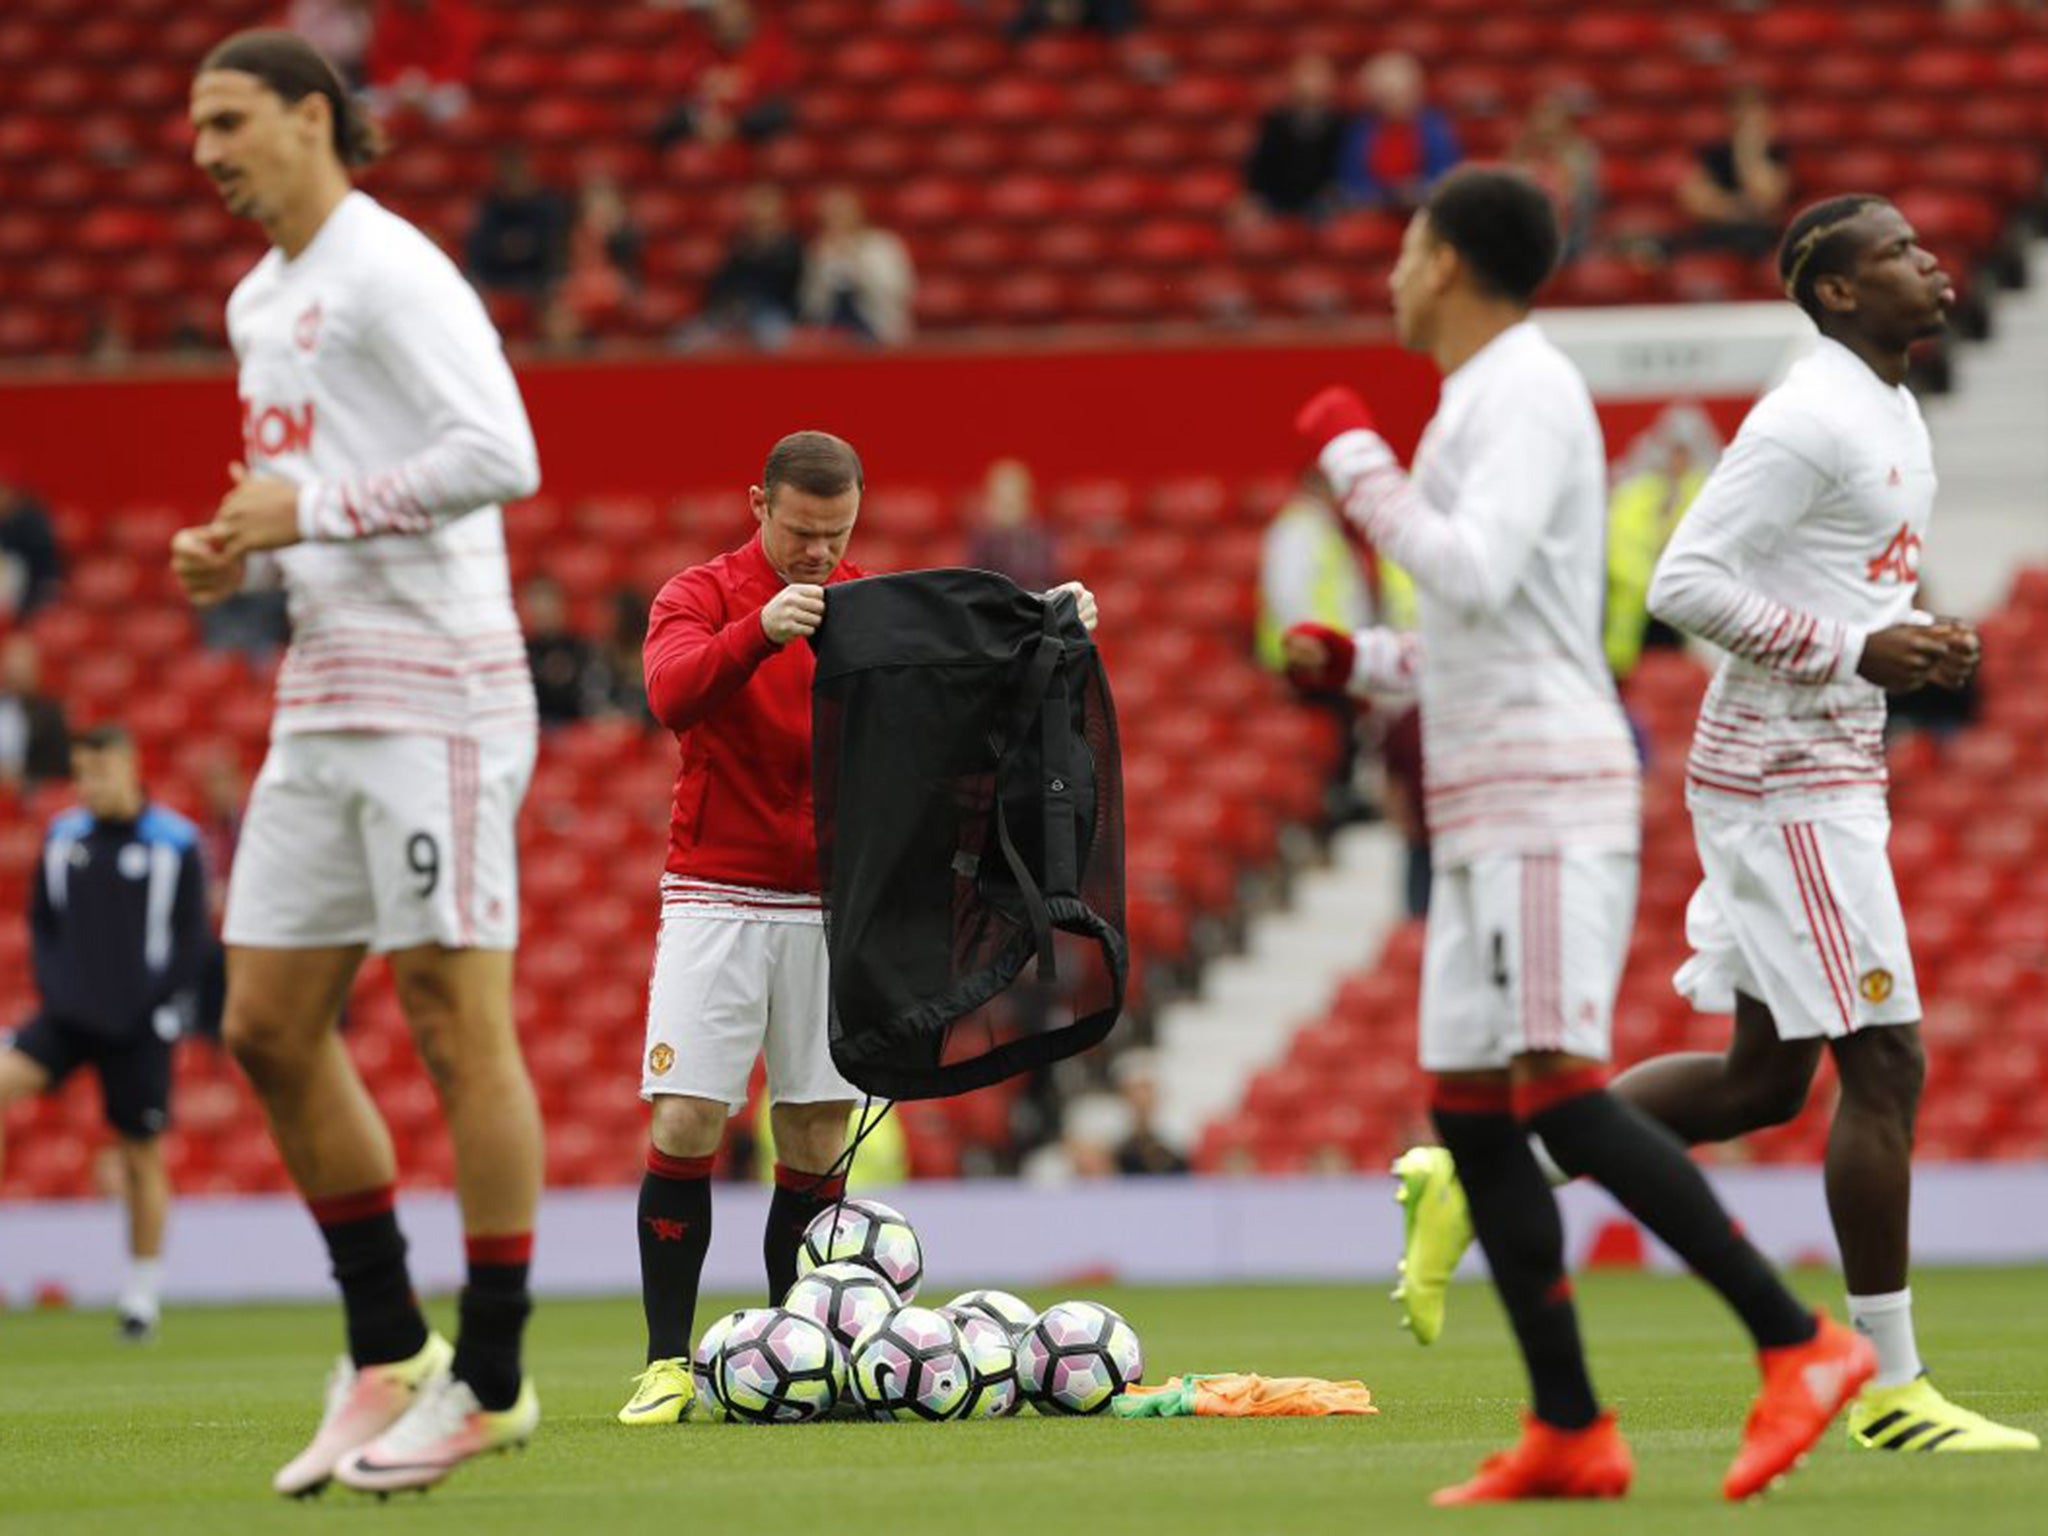 Rooney on ball bag duty as his team-mates warm up